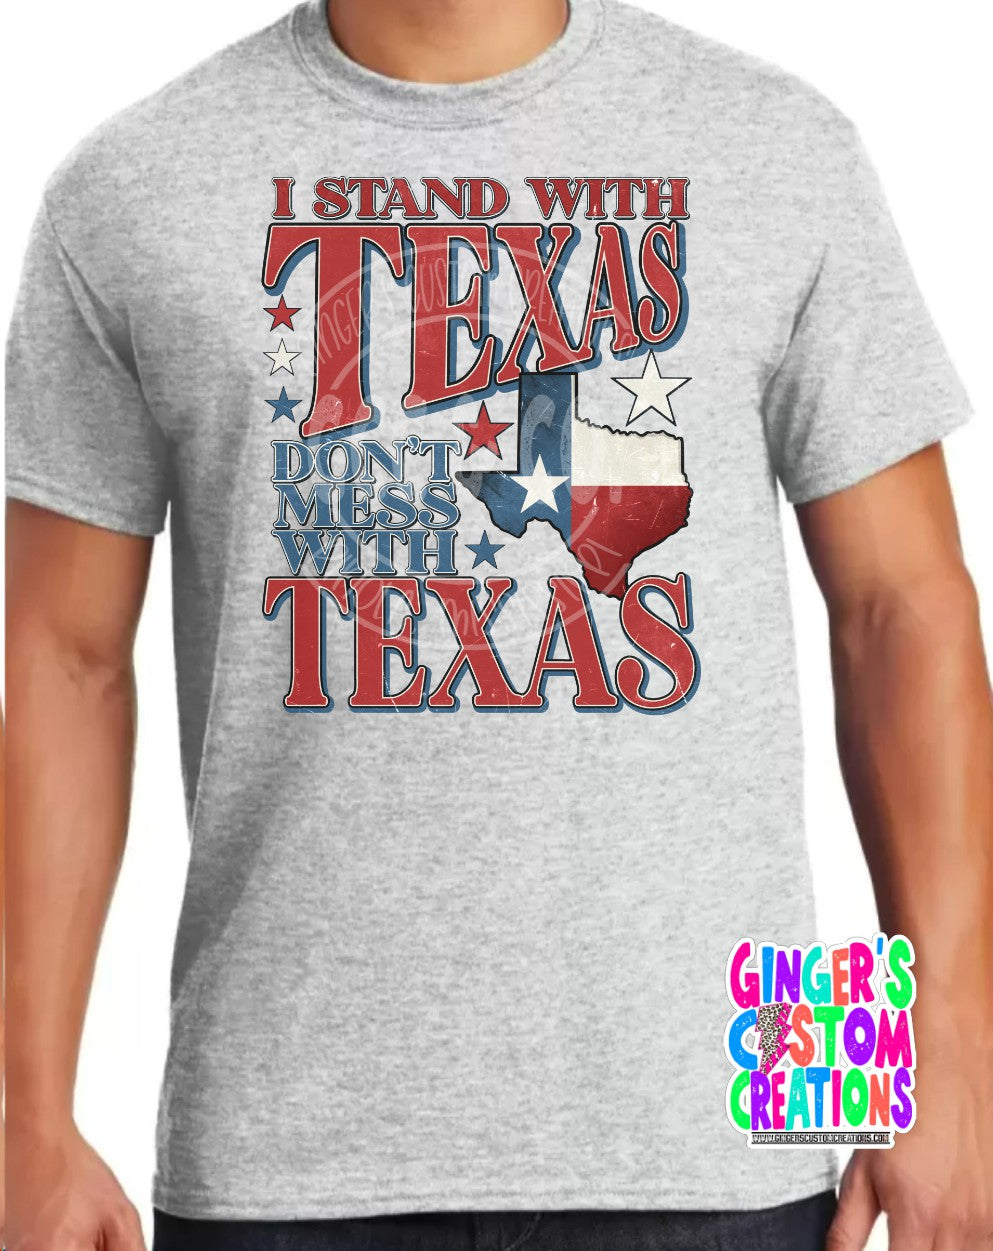 I STAND WITH TEXAS SHORT SLEEVE T SHIRT